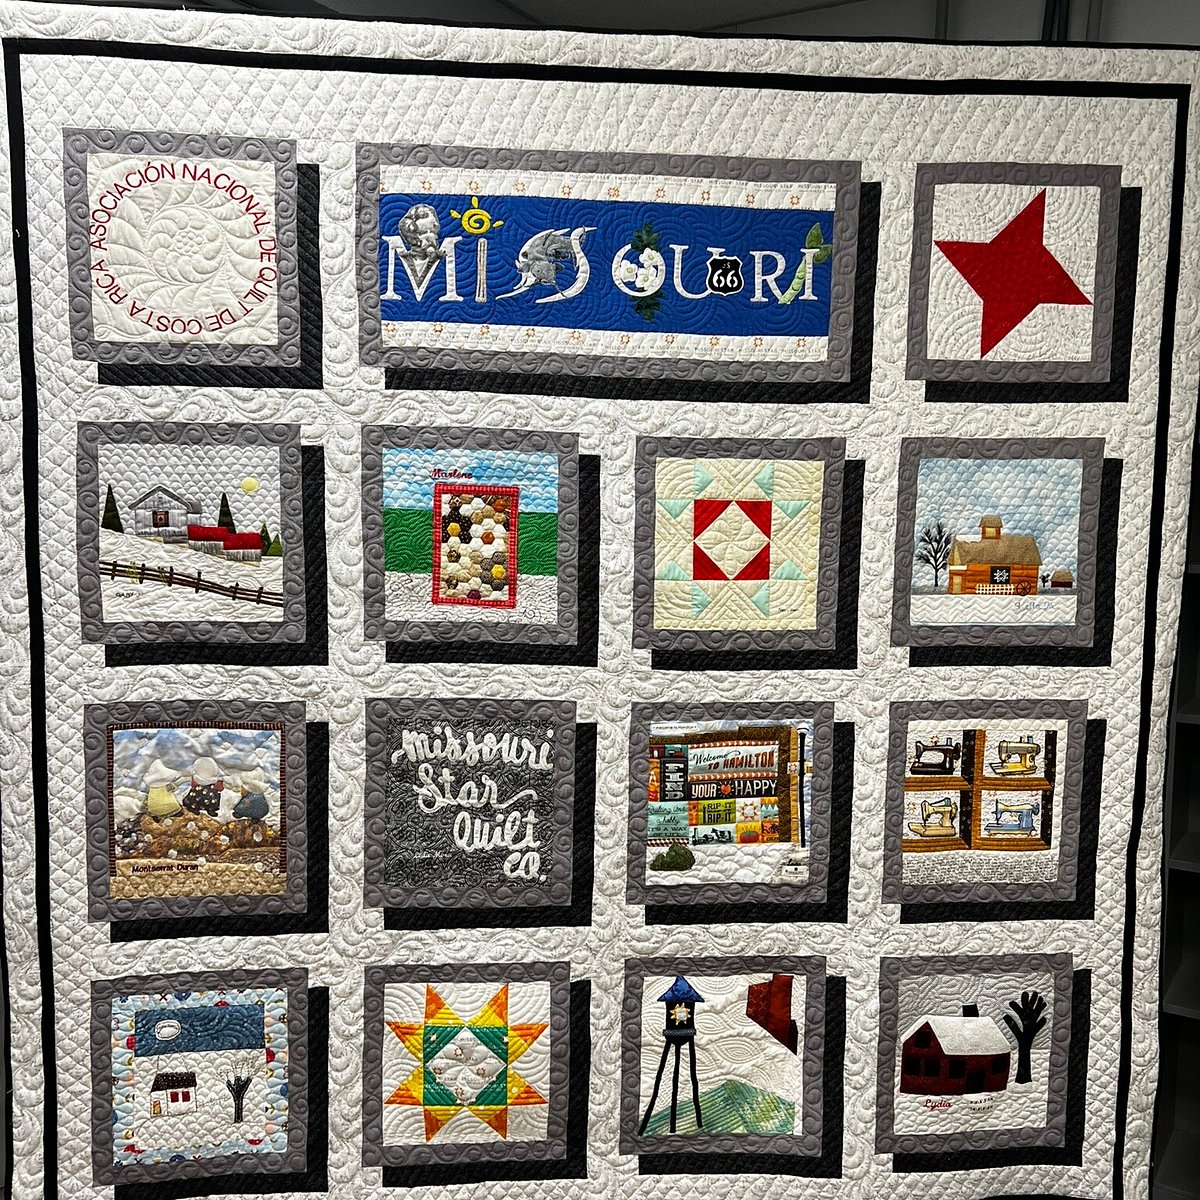 Missouri Star Quilt Company - All You Need to Know BEFORE You Go